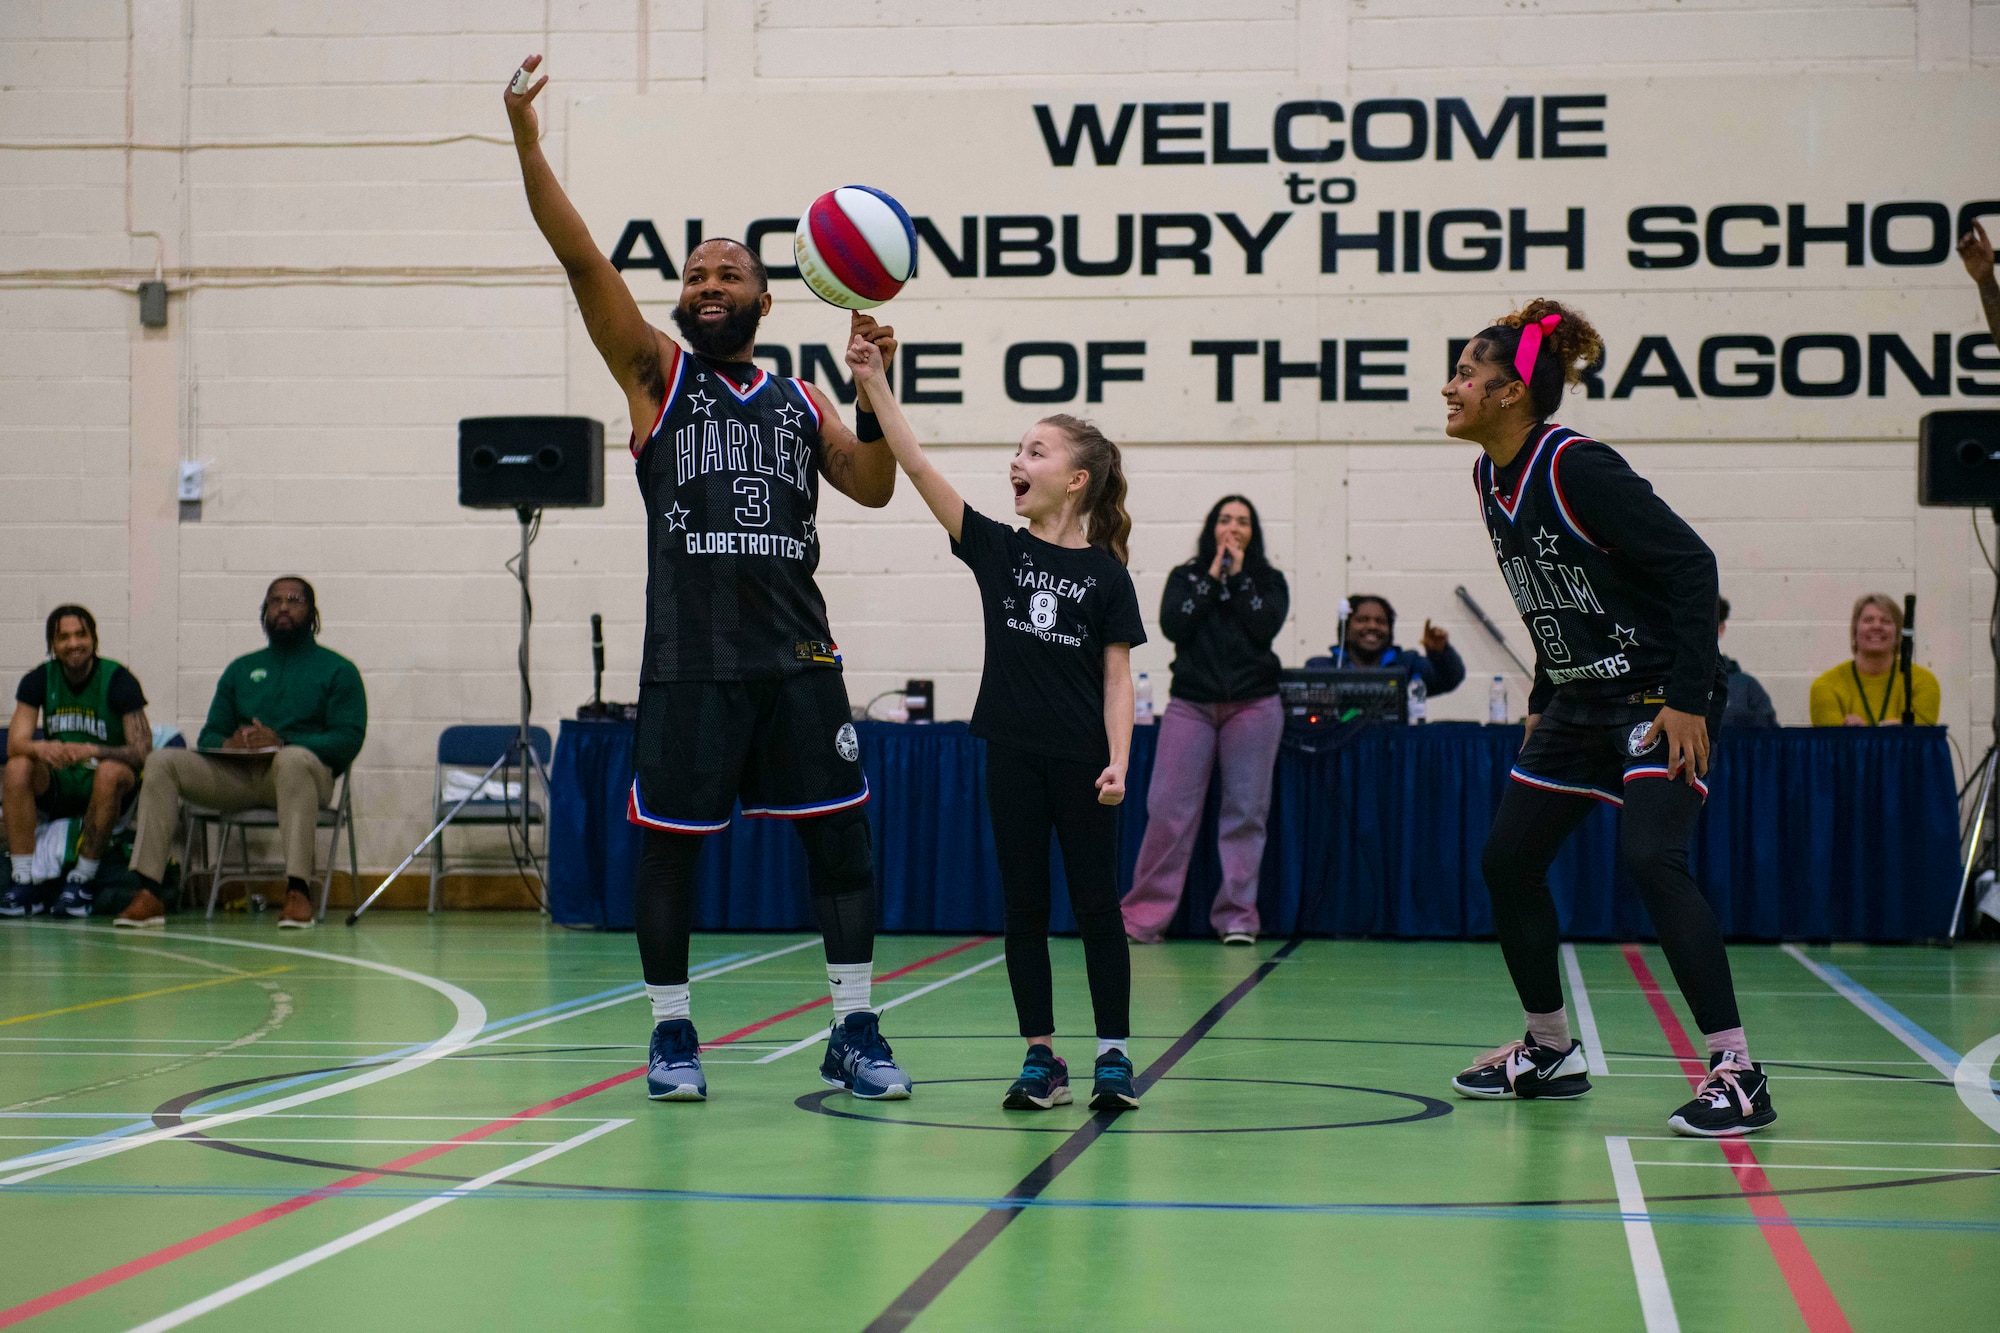 Darnell “Speedy” Artis, Harlem Globetrotters guard, left, helps a member of the crowd spin a basketball on her finger at RAF Alconbury